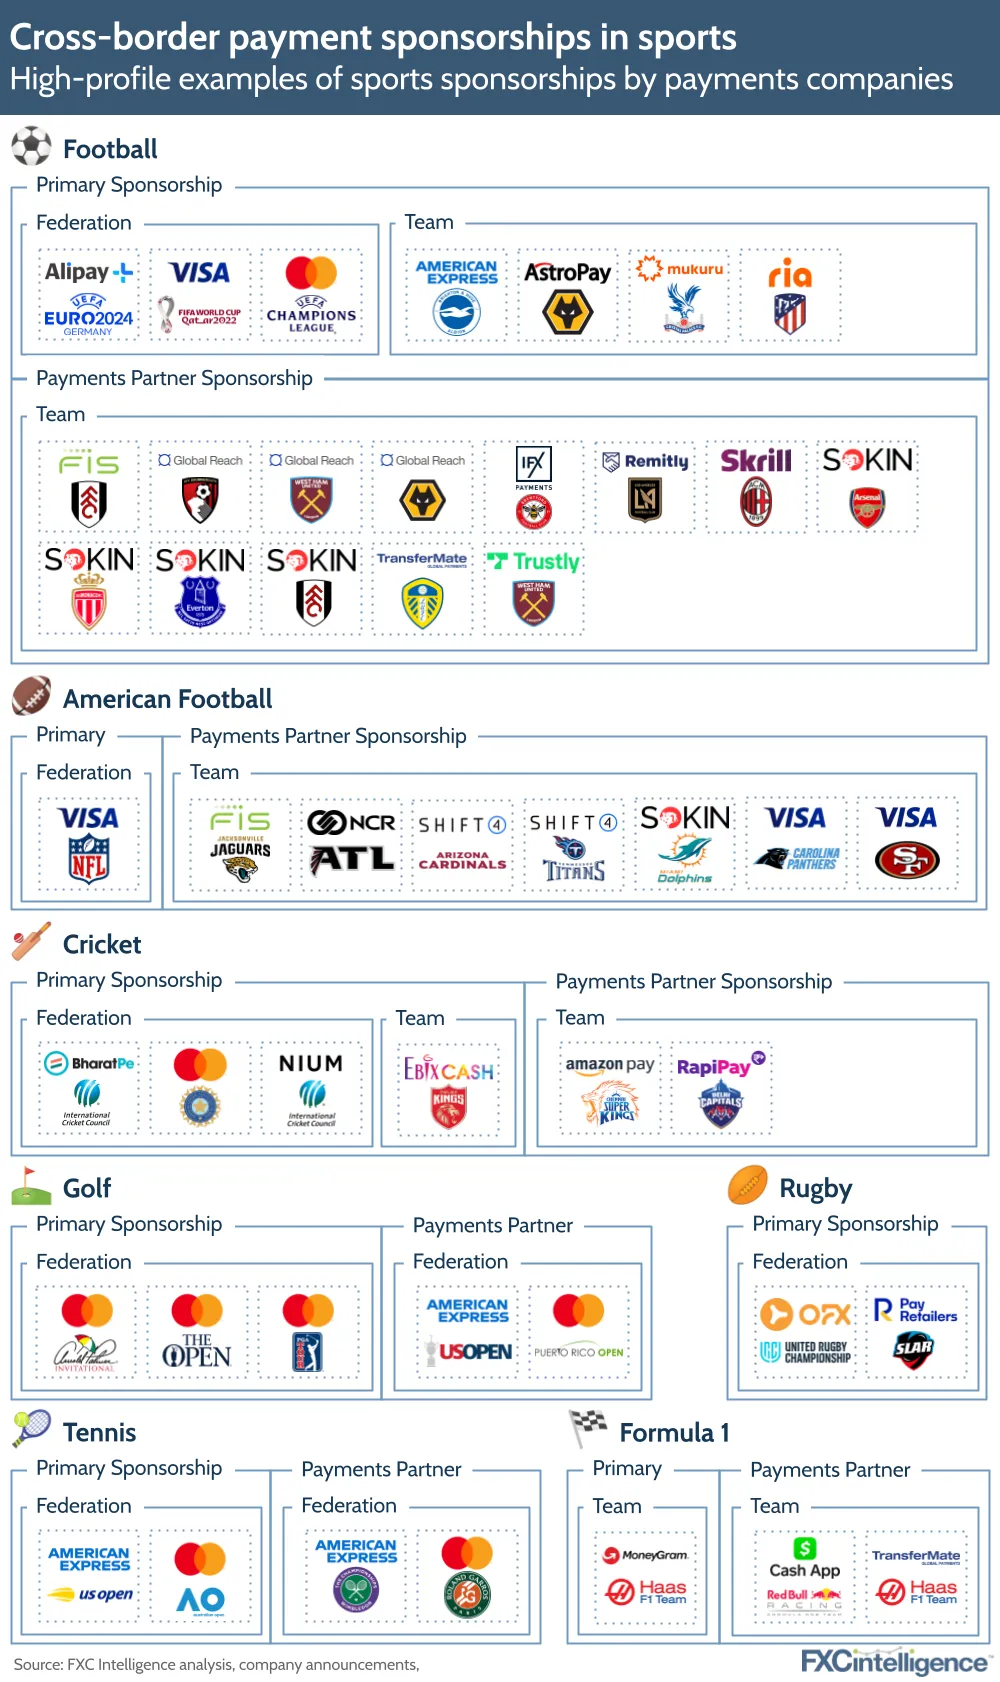 Cross-border payment sponsorships in sports: high profile examples